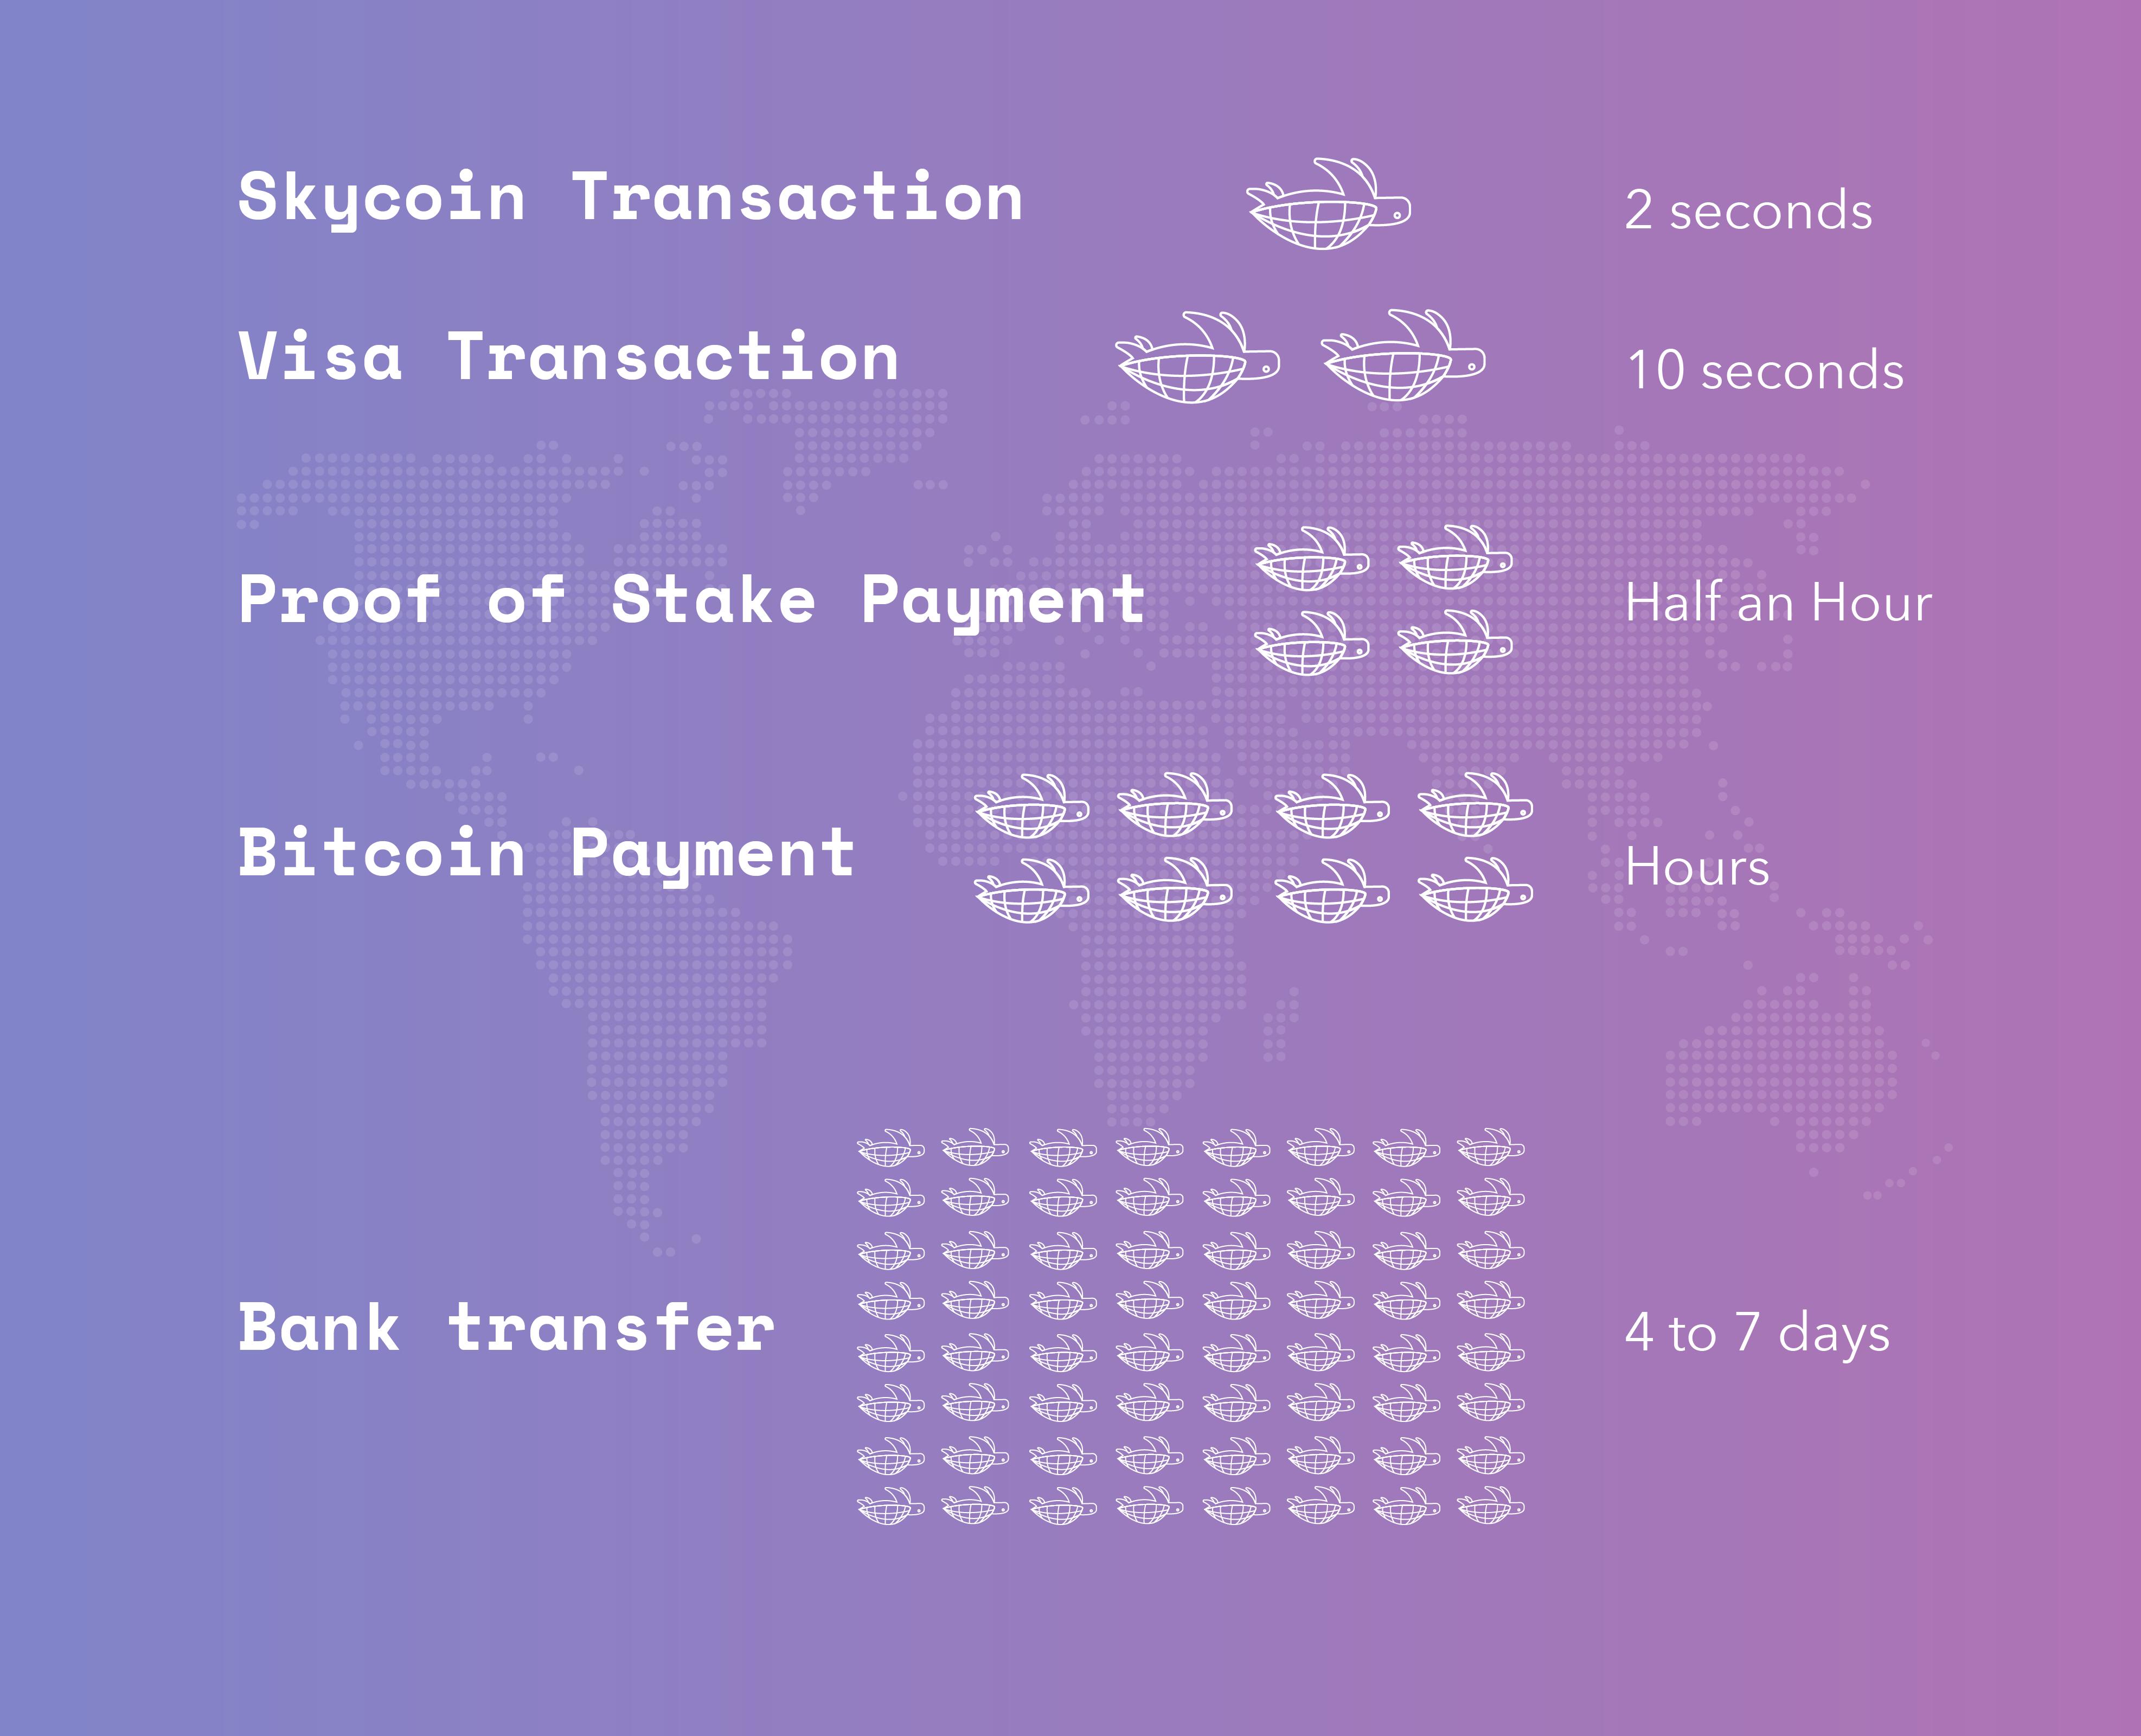 Skycoin transaction speed comparison chart